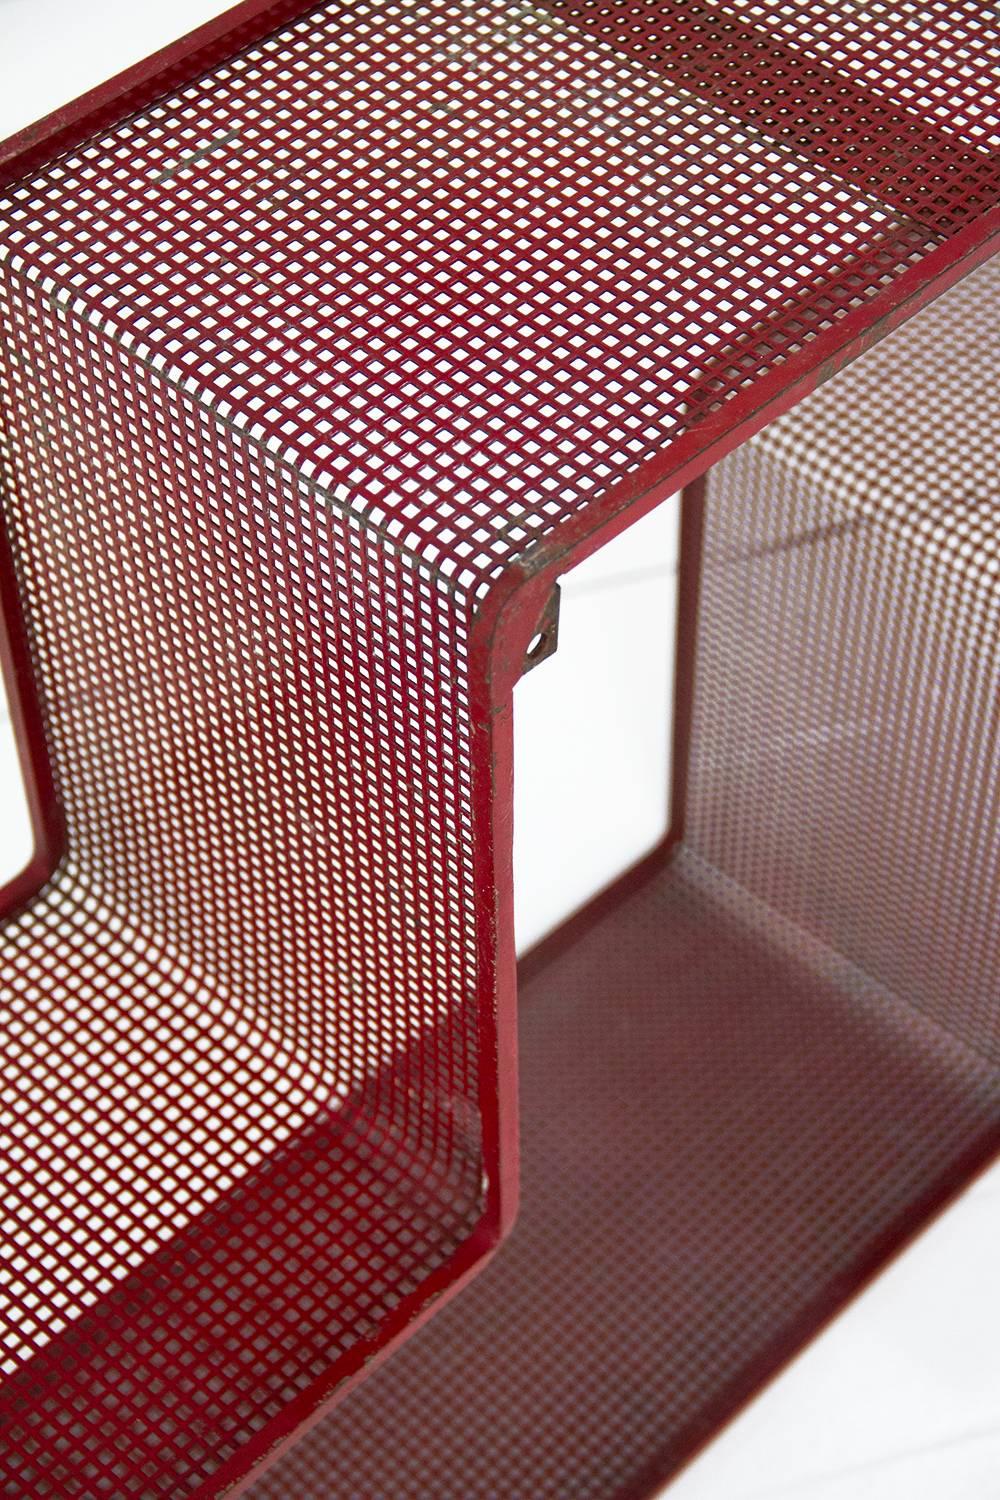 Red Dedal Wall Shelf by Mathieu Matégot, Perforated Steel, circa 1950, France For Sale 1